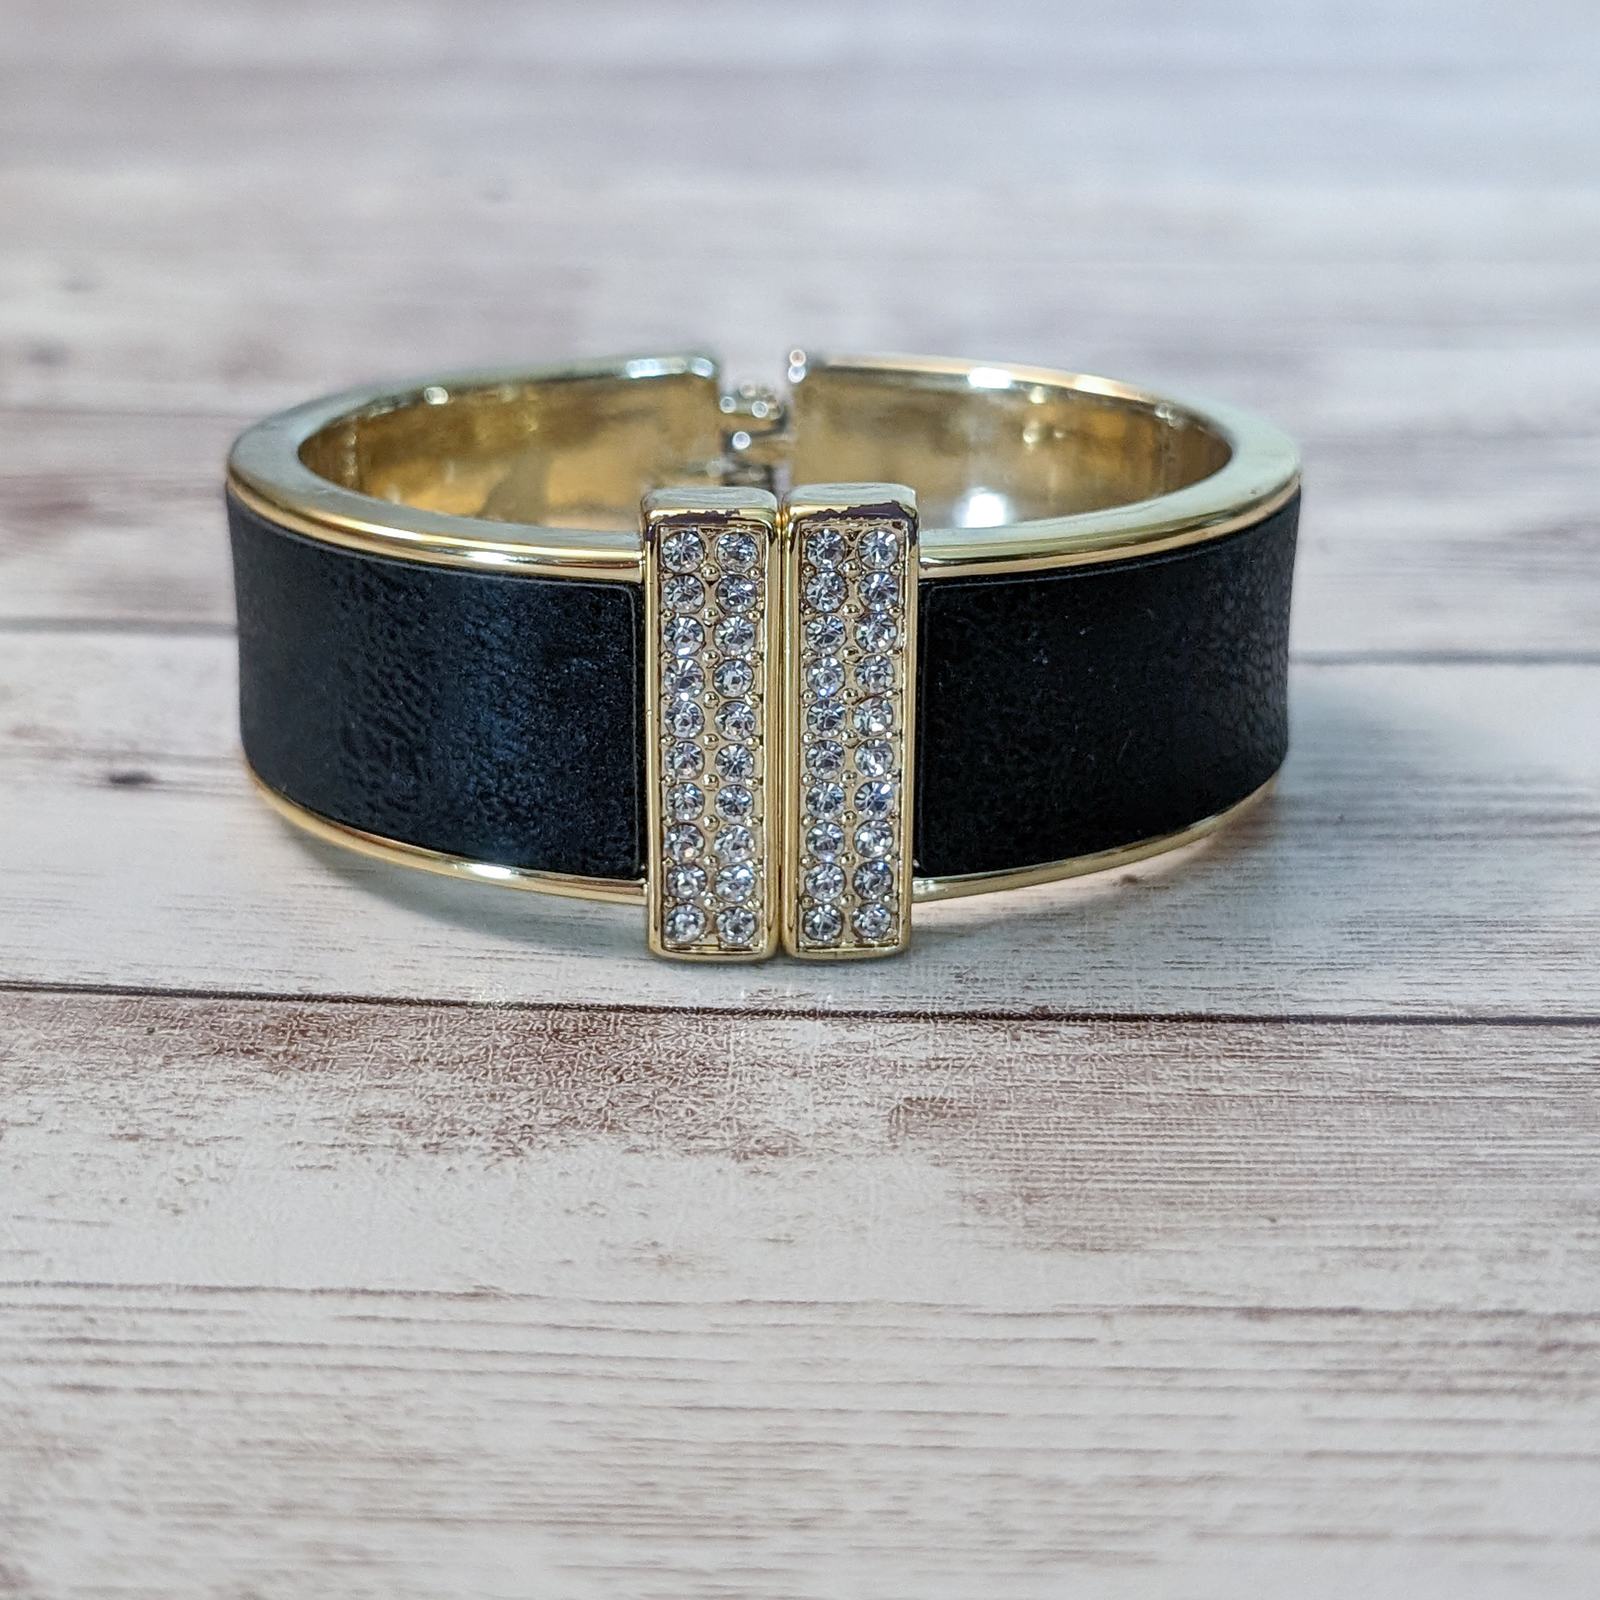 Primary image for Vintage Hinged Bracelet Gold Tone & Black - Fair Condition